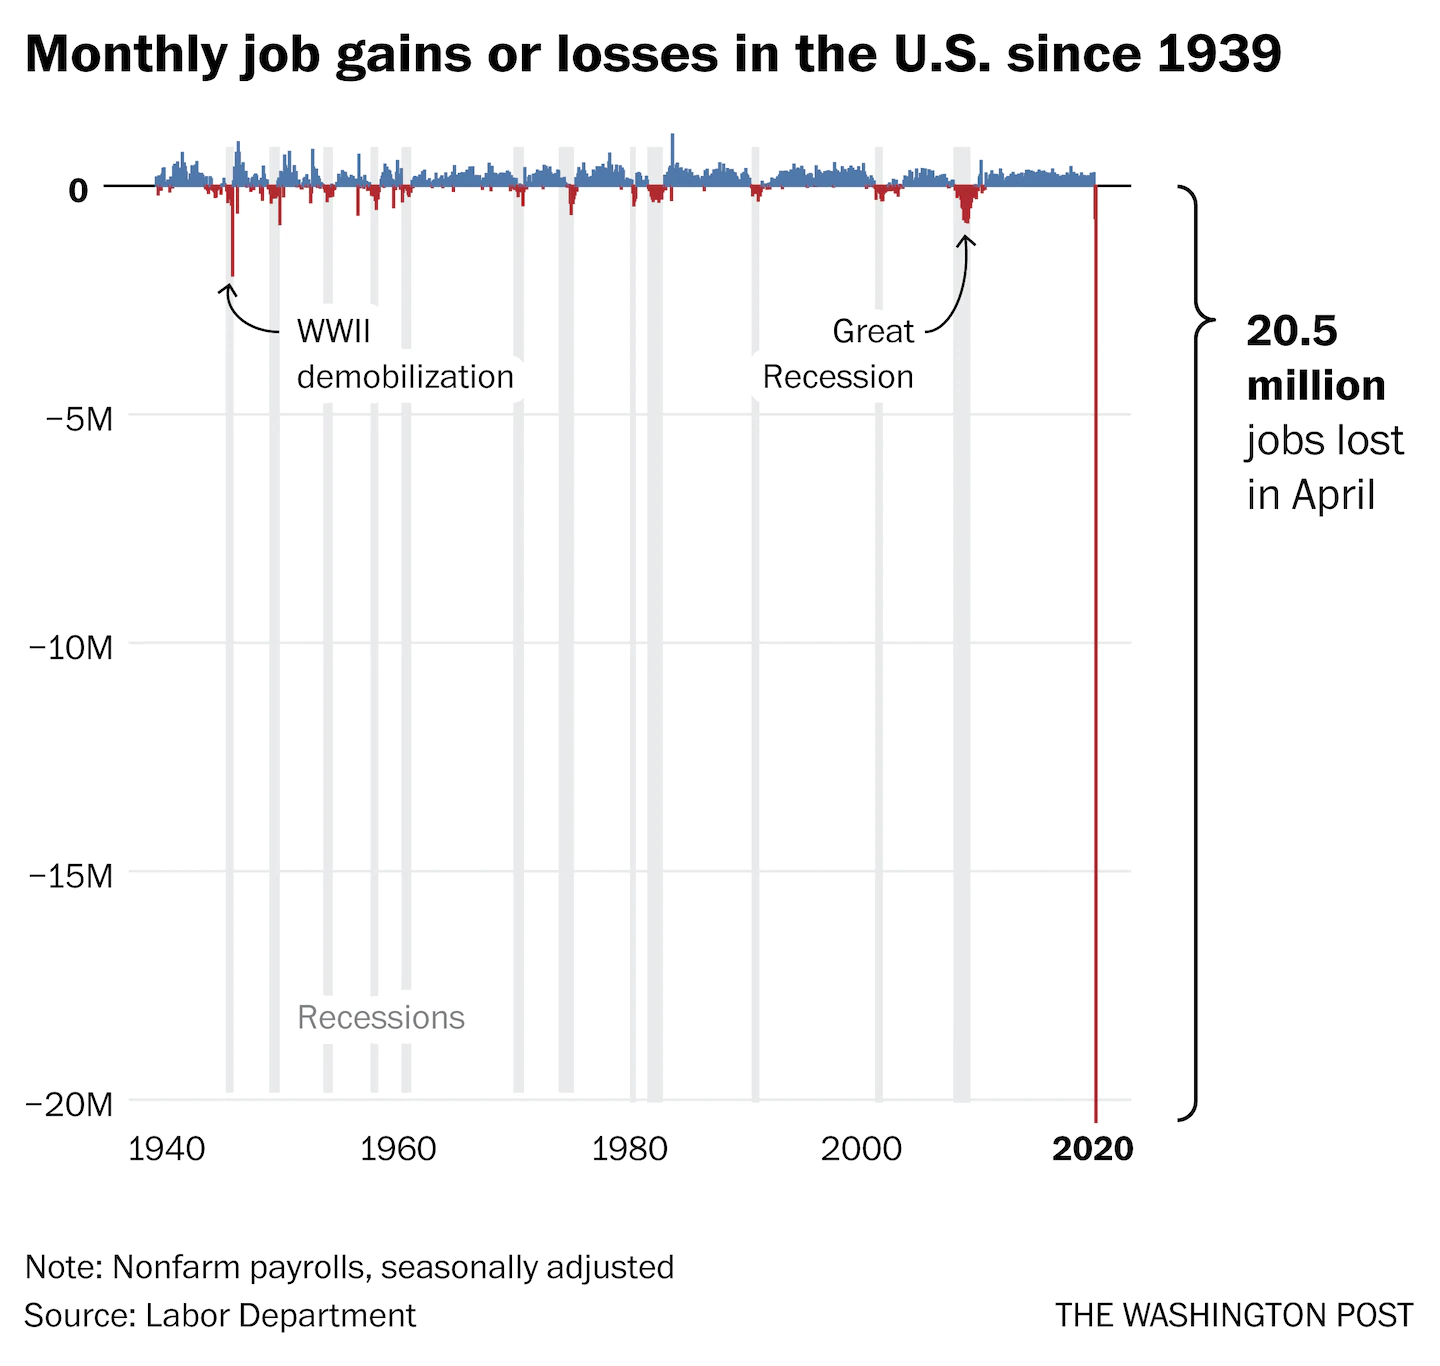 Monthly job gains or losses in the U.S., from 1939 to 30 April 2020. Data: U.S. Labor Department. Graphic: The Washington Post